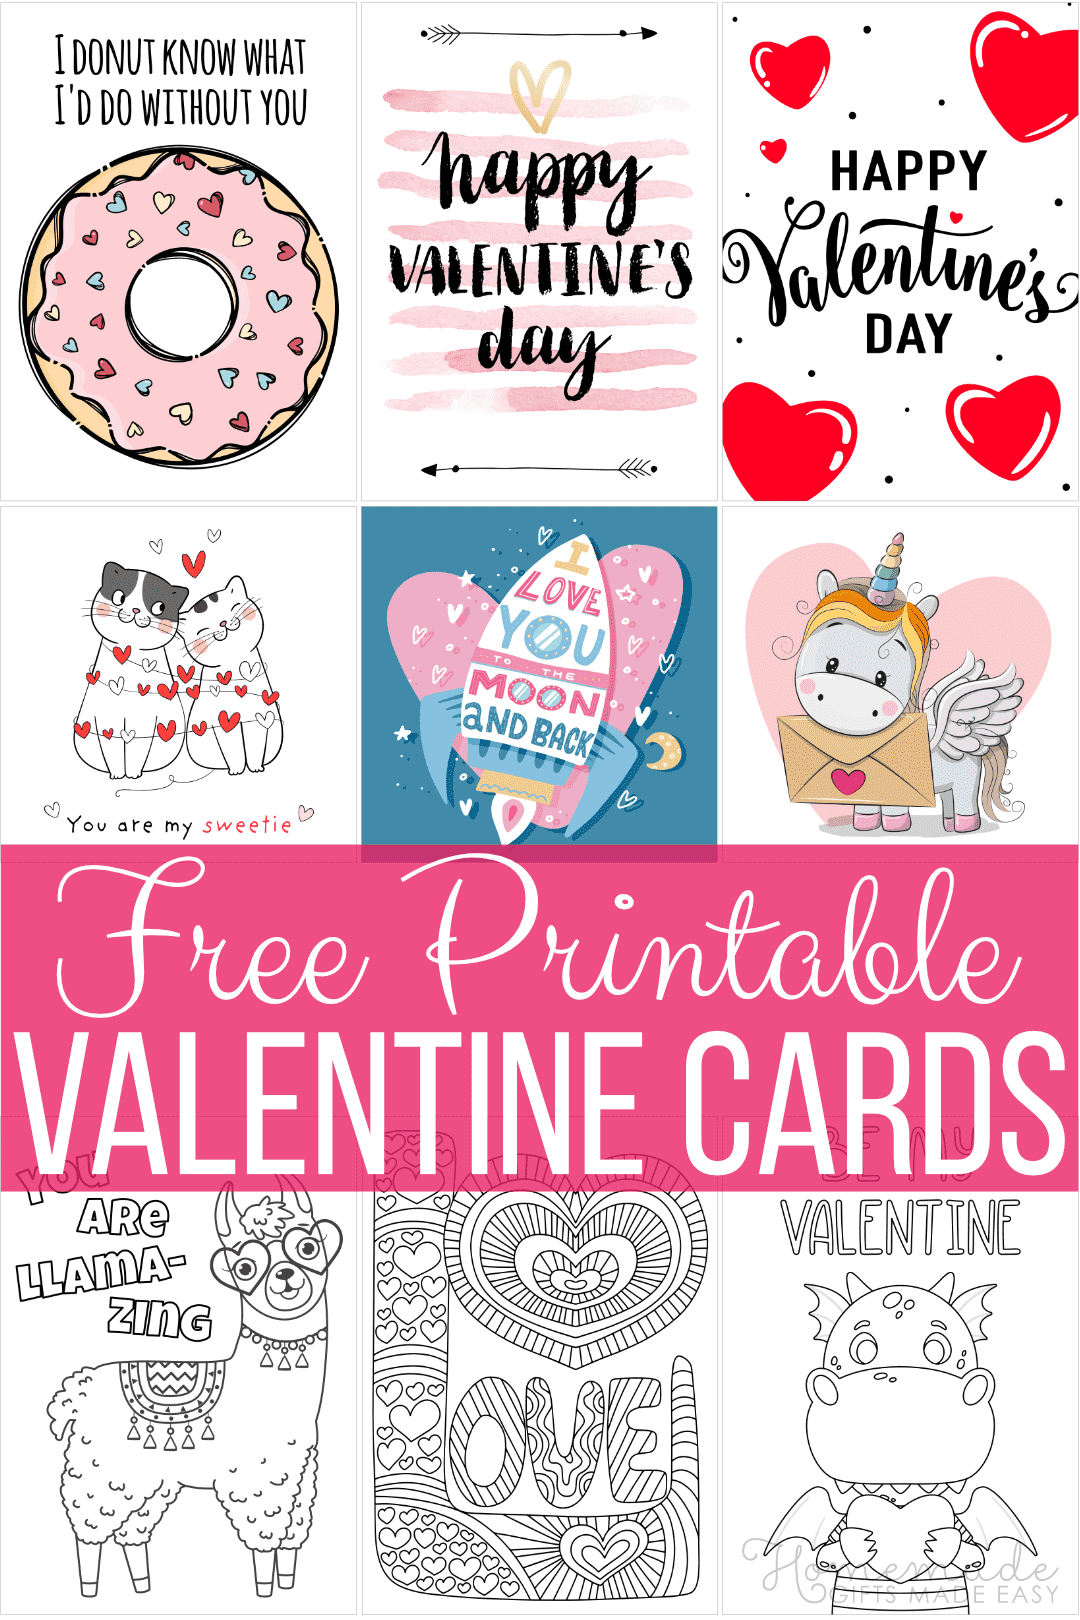 Free Printable Valentine Cards For Elementary Kids